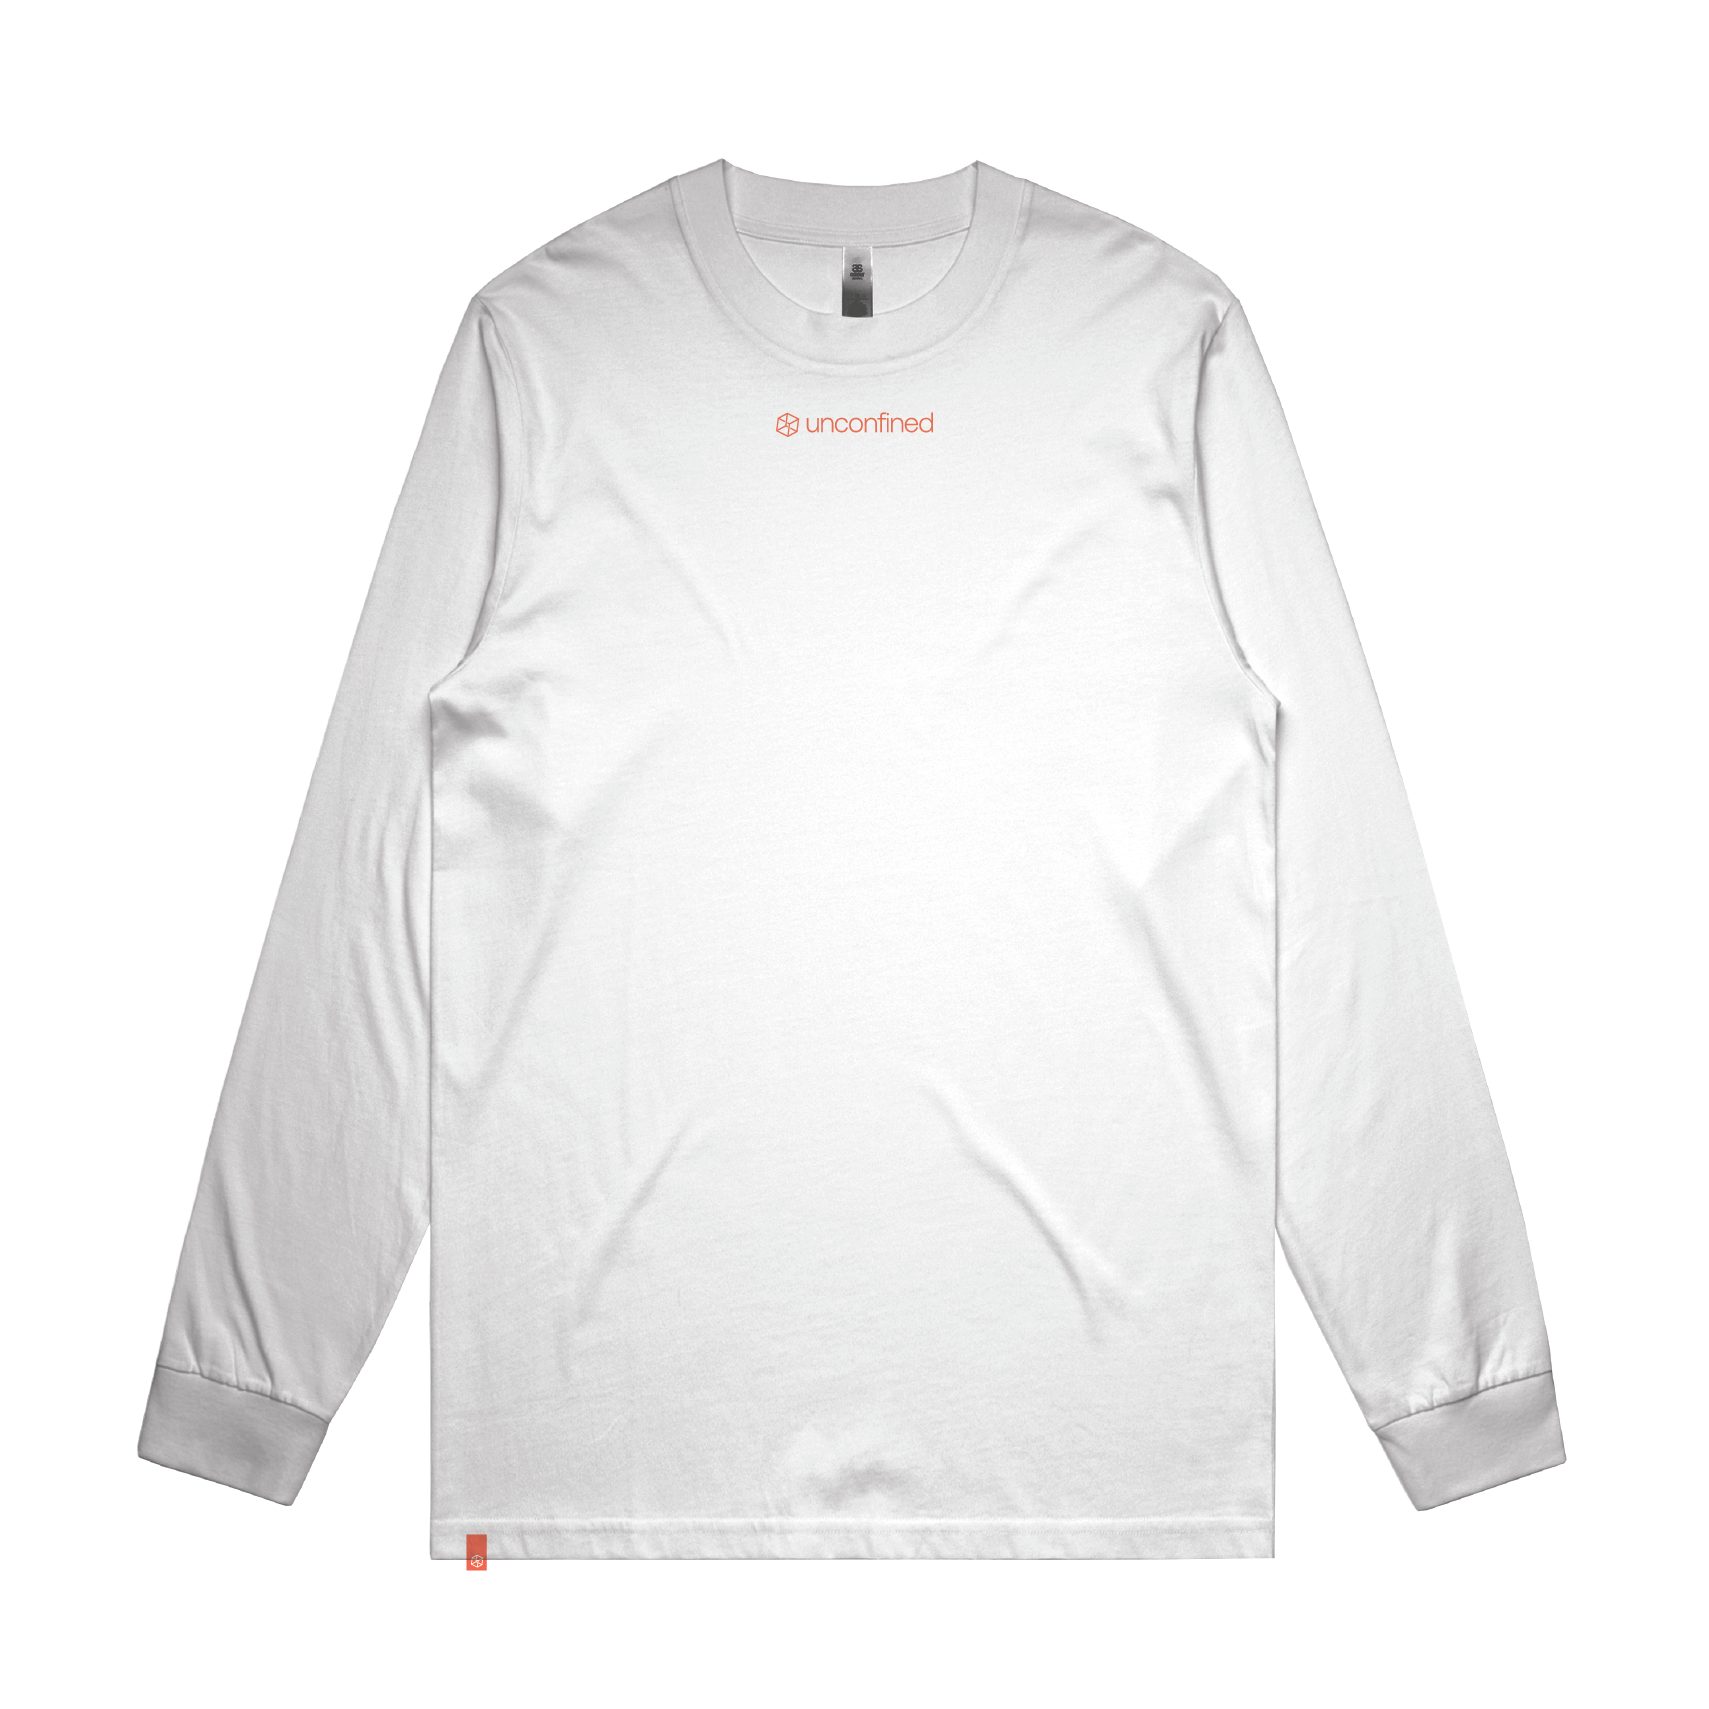 The Serpent Graphic Long Sleeve T-Shirt